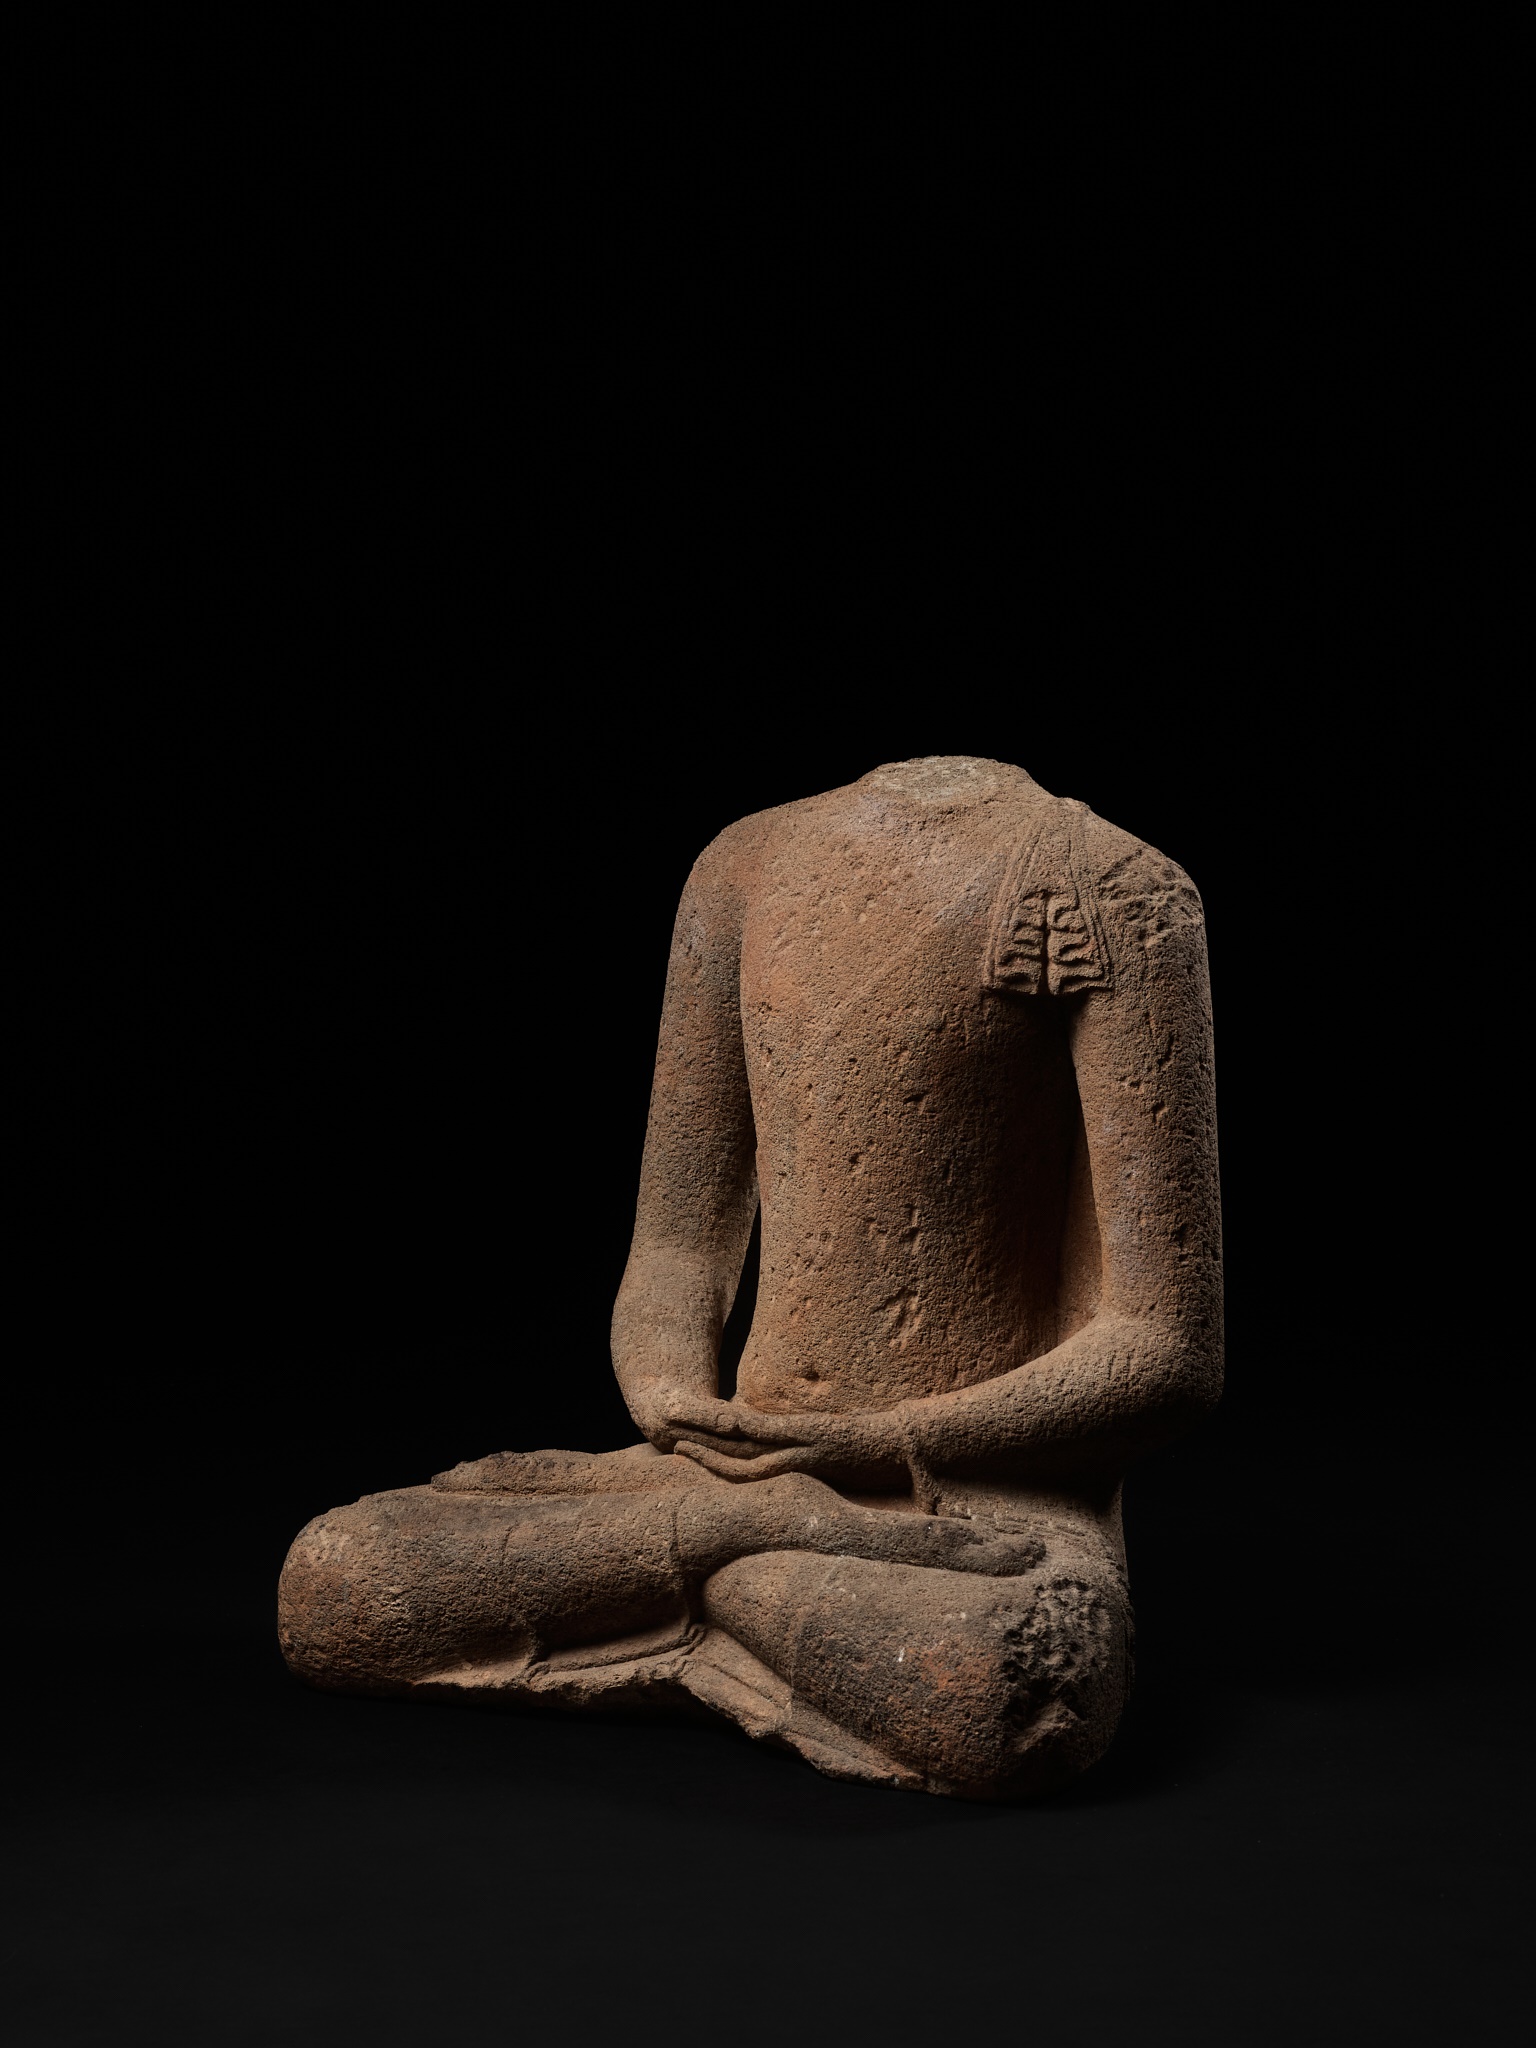 A RARE AND LARGE ANDESITE TORSO OF BUDDHA AMITABHA, CENTRAL JAVANESE PERIOD, SHAILENDRA DYNASTY - Image 8 of 16